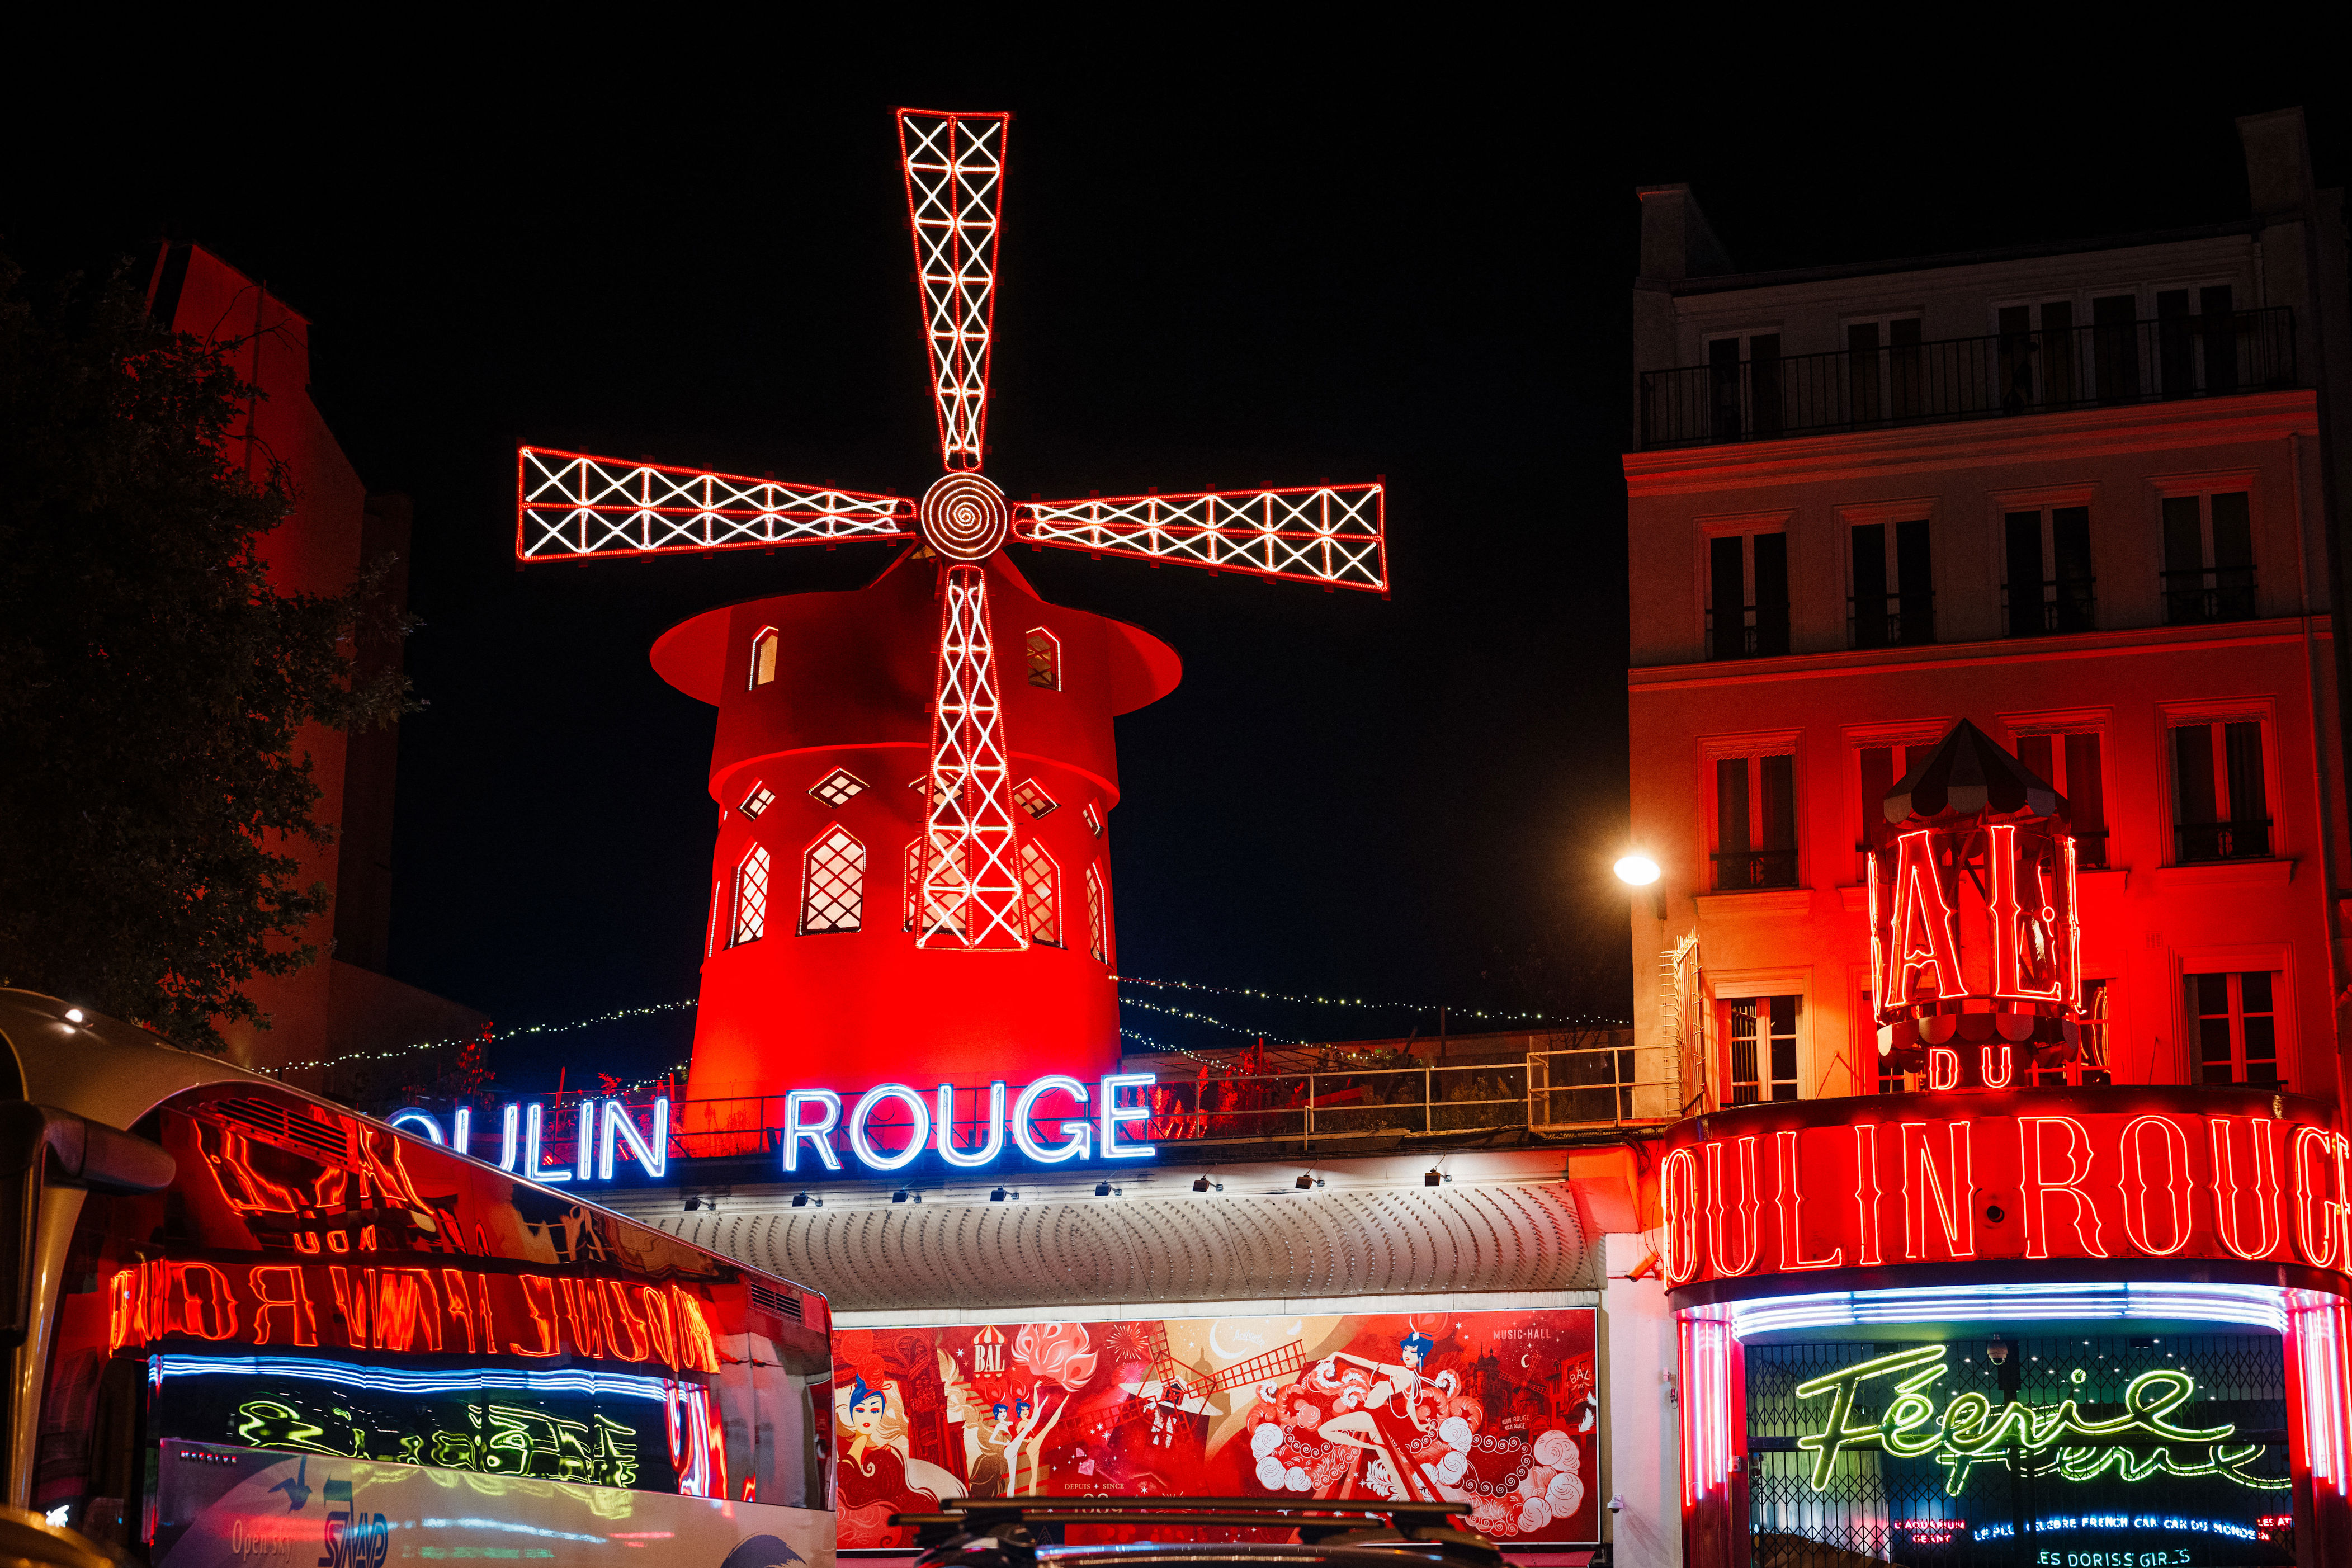 moulin rouge windmill blades reportedly collapse